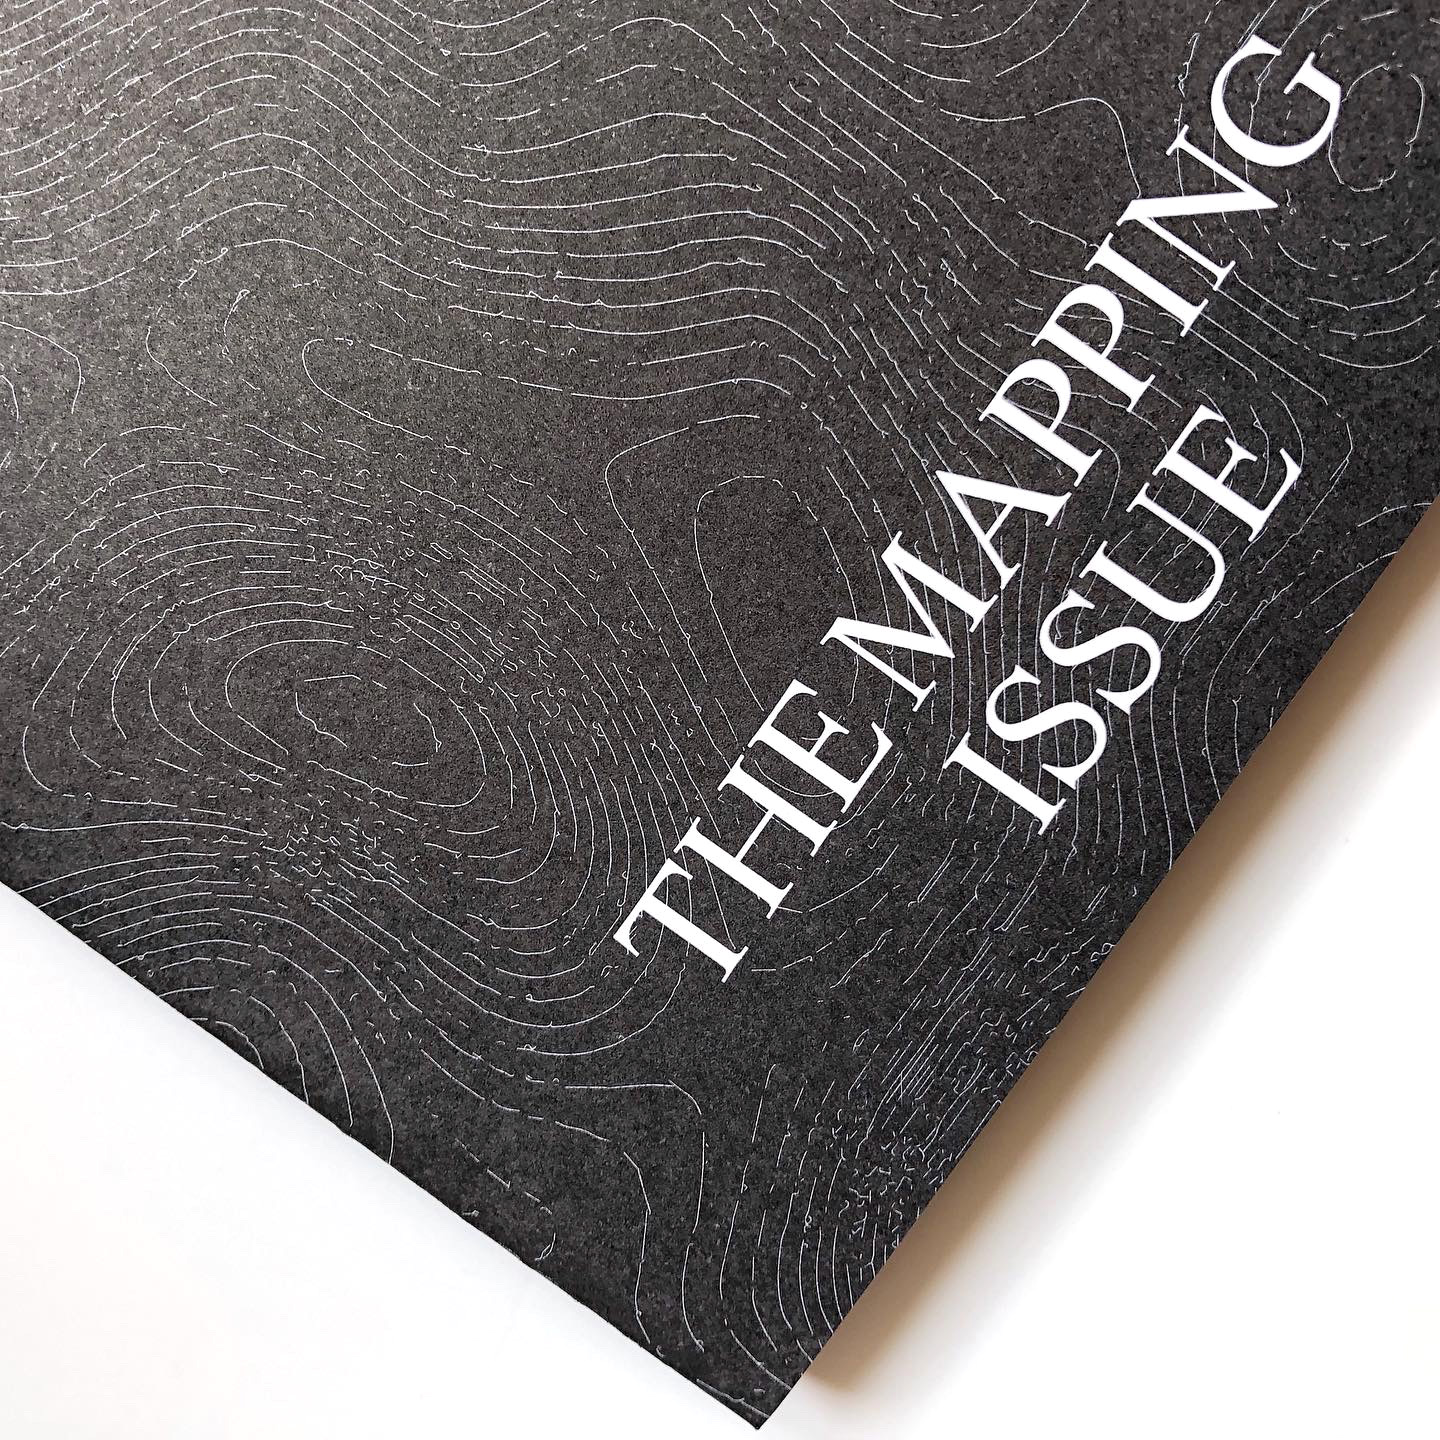 Cover The Mapping issue